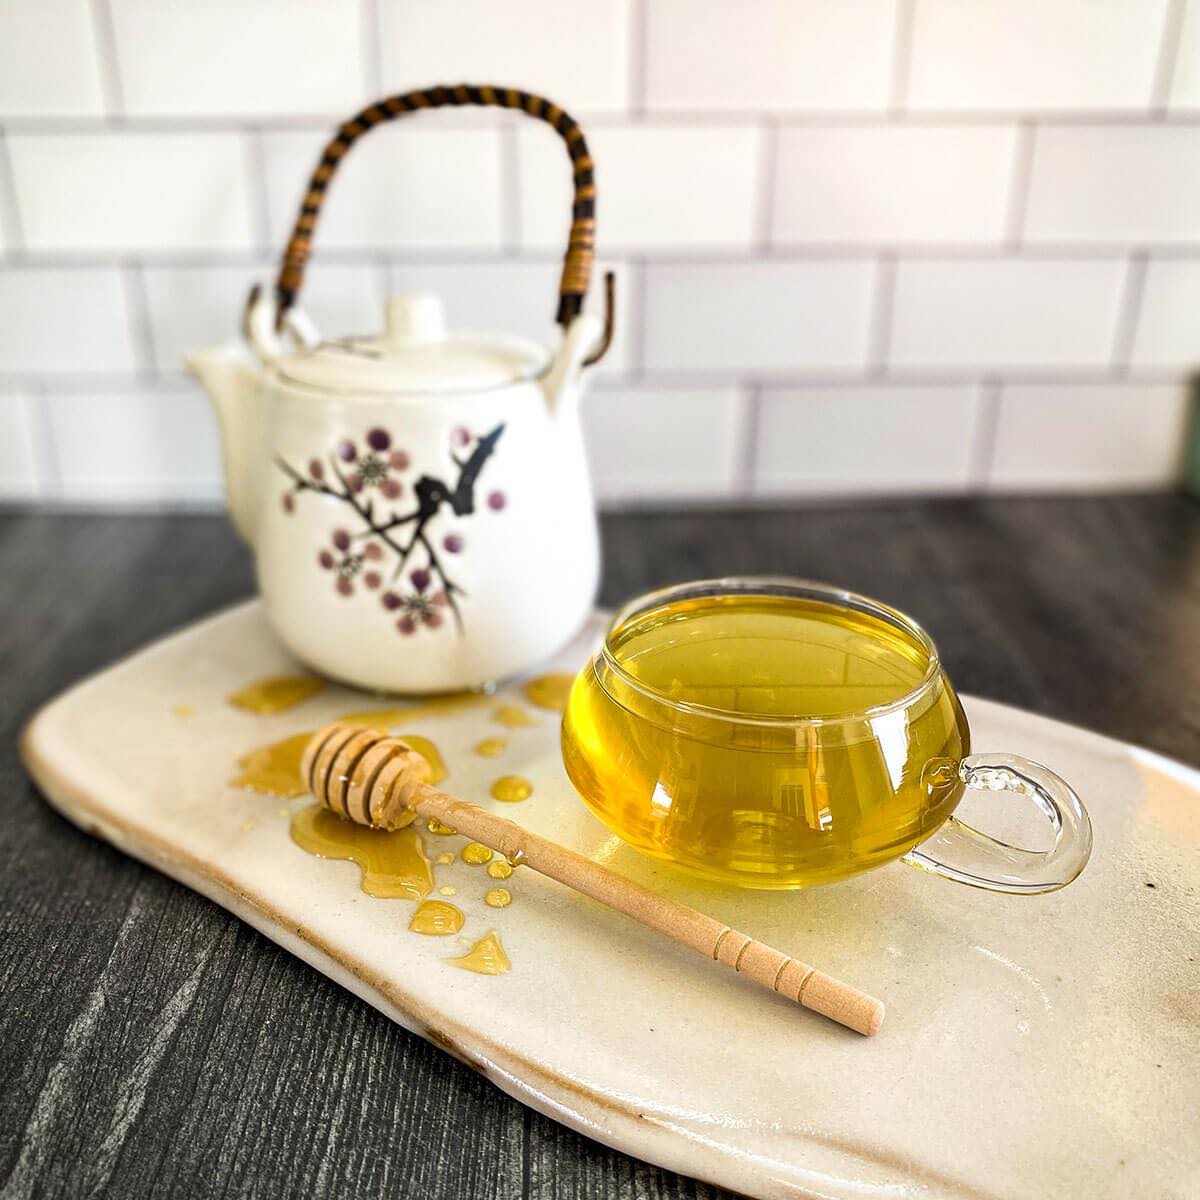 A clear mug of brewed Yerba Mate Tea rests on a ceramic white surface with a white teapot and honey wand.